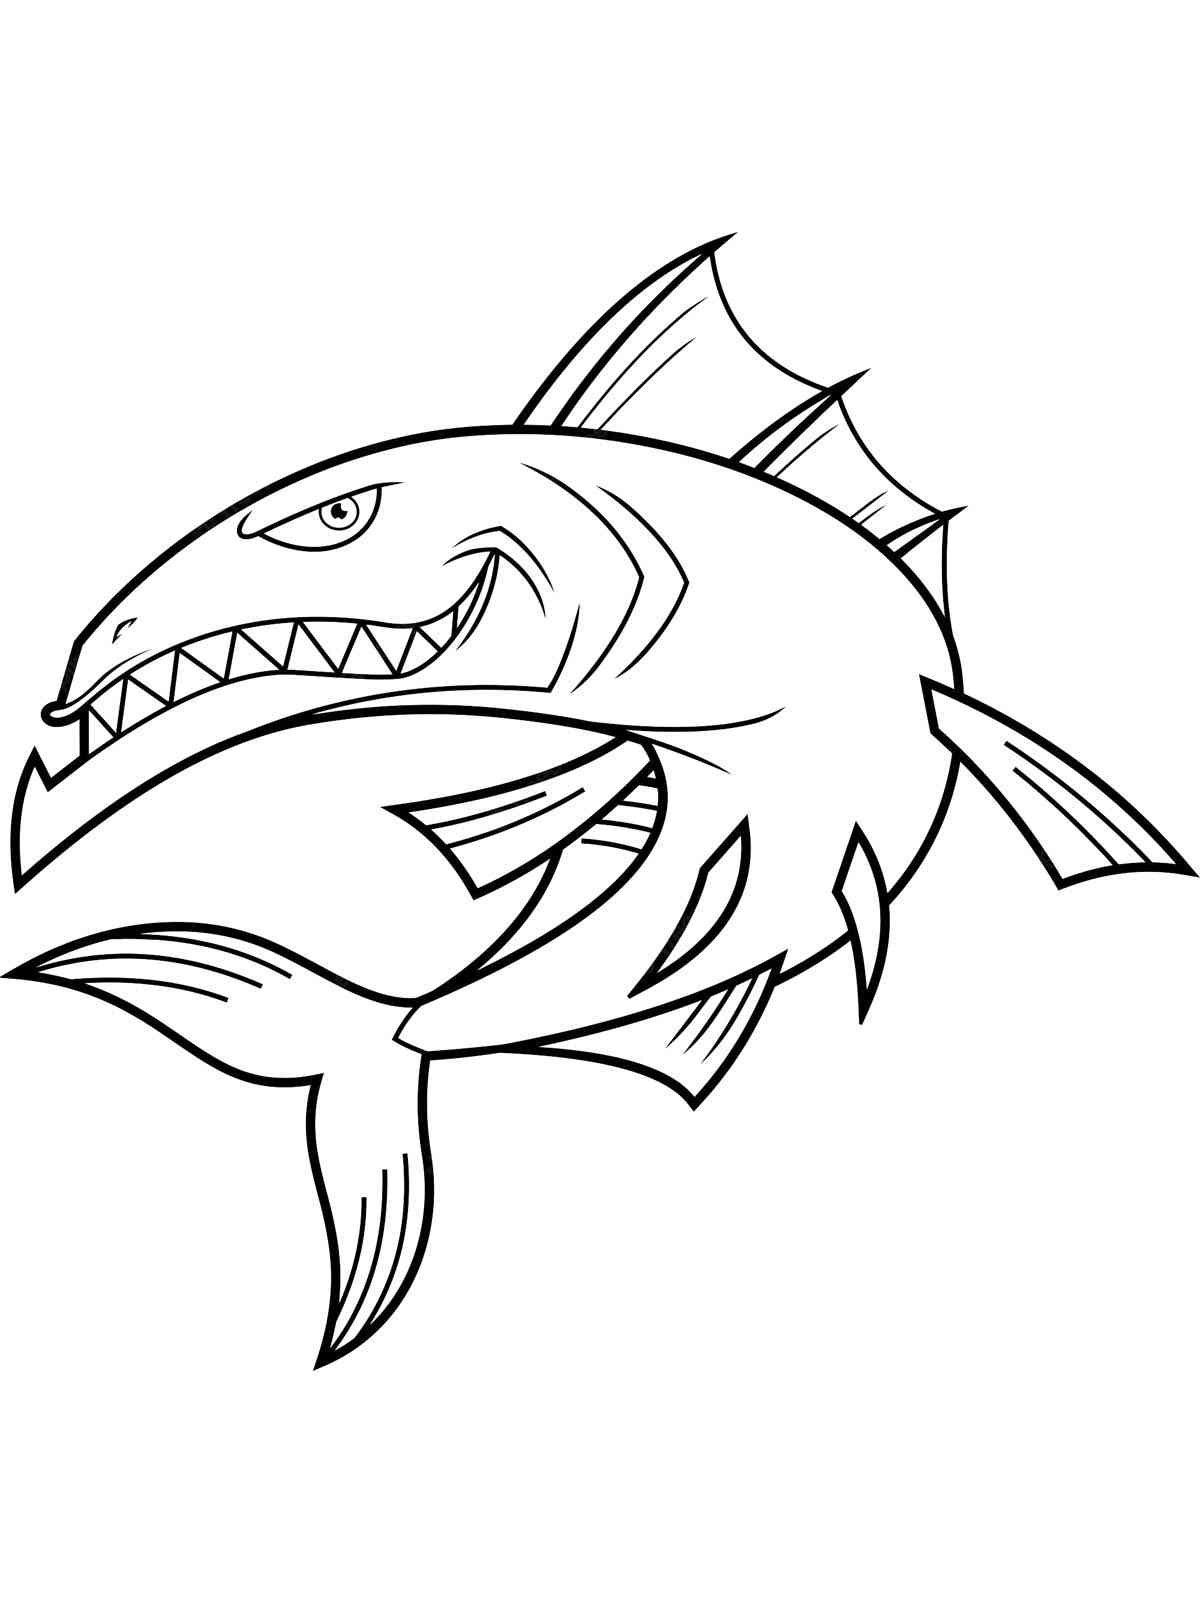 Angry Barracuda coloring page